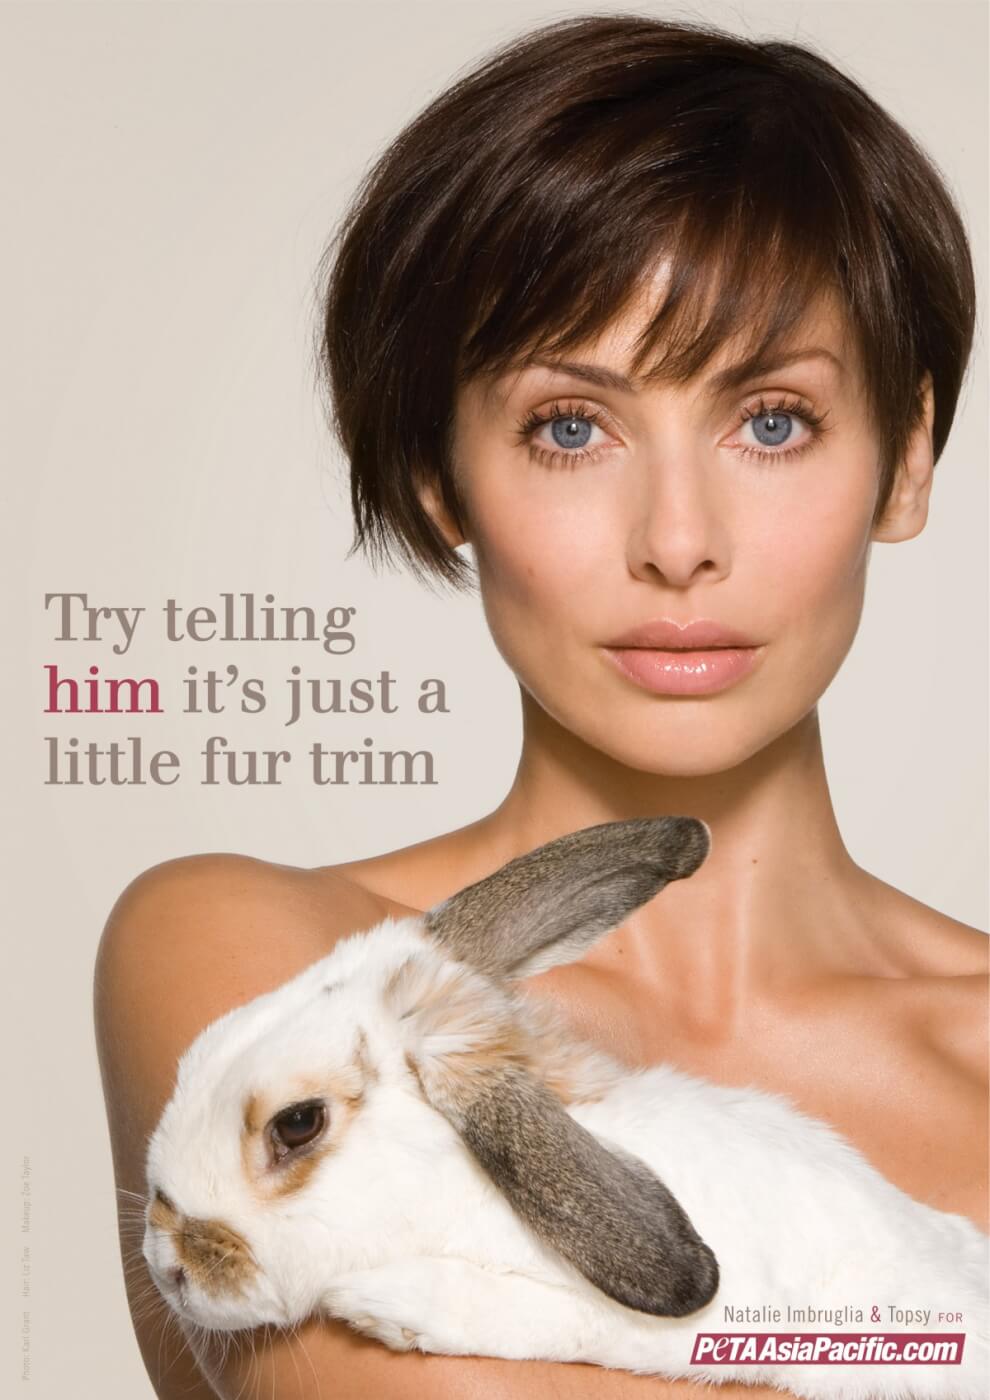 Natalie Imbruglia holds a rabbit. Text reads: Try telling him it's just a little fur trim